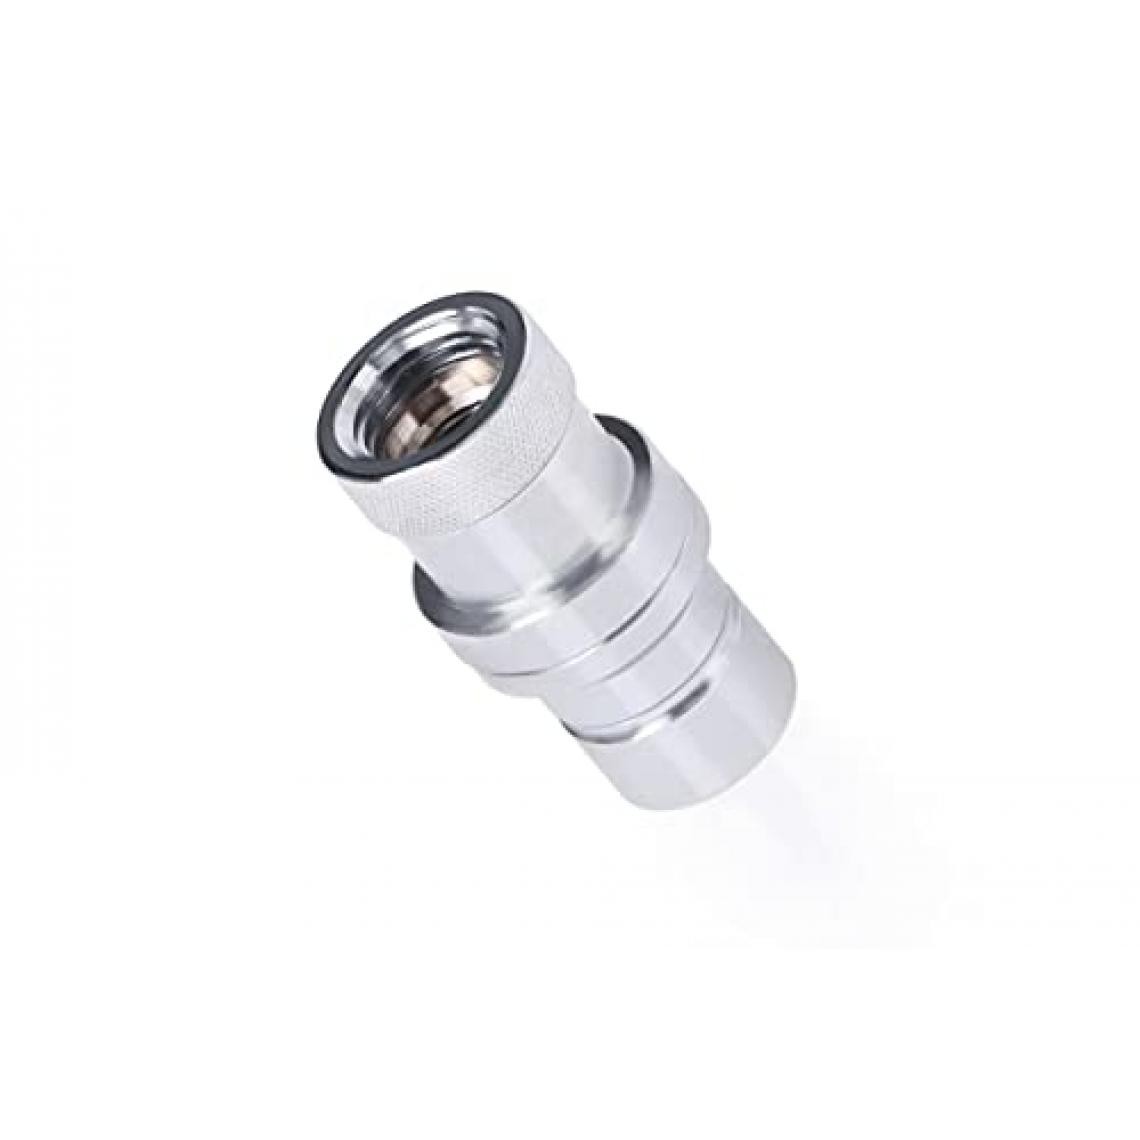 Alphacool - Raccord autobloquant Eiszapfen Quick Coupling male G1/4 (Argent) - Kit watercooling